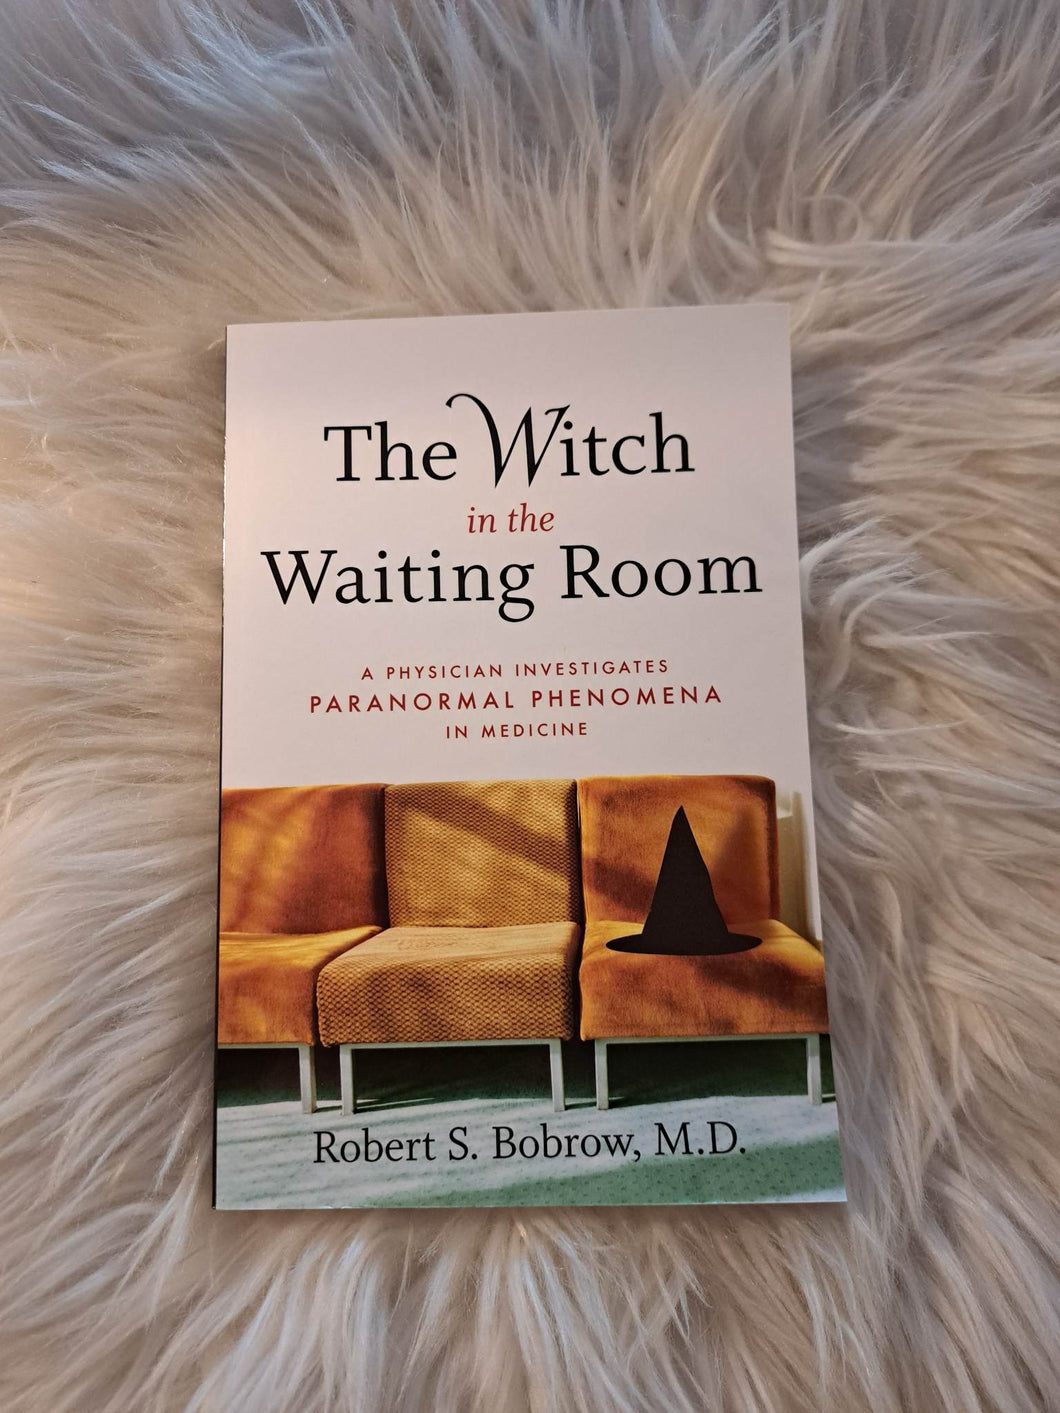 The Witch in the Waiting Room: A Physician Investigates Paranormal Phenomena in Medicine